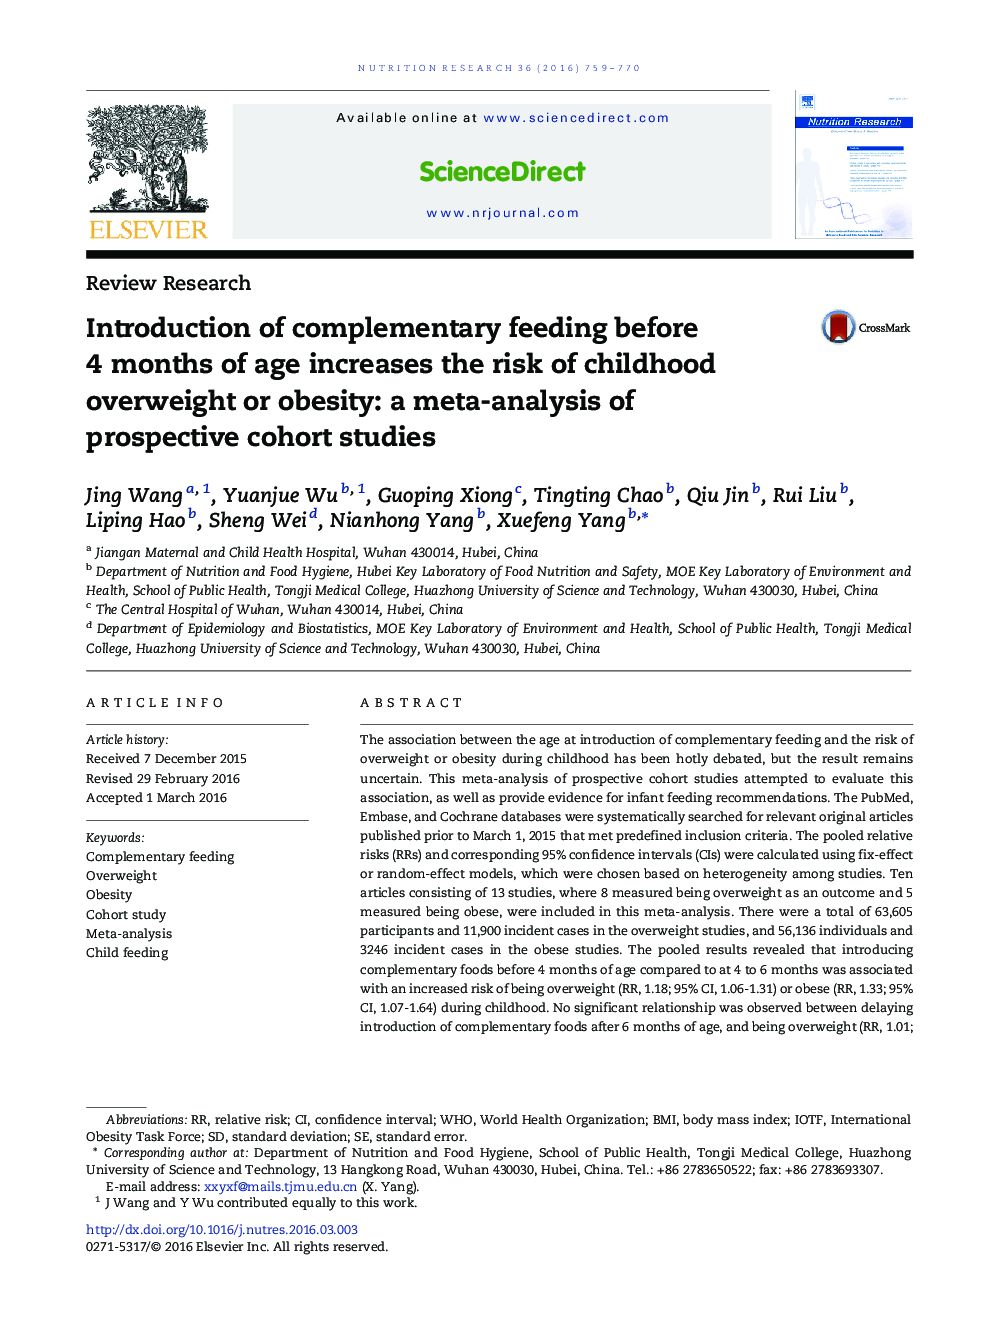 Introduction of complementary feeding before 4 months of age increases the risk of childhood overweight or obesity: a meta-analysis of prospective cohort studies